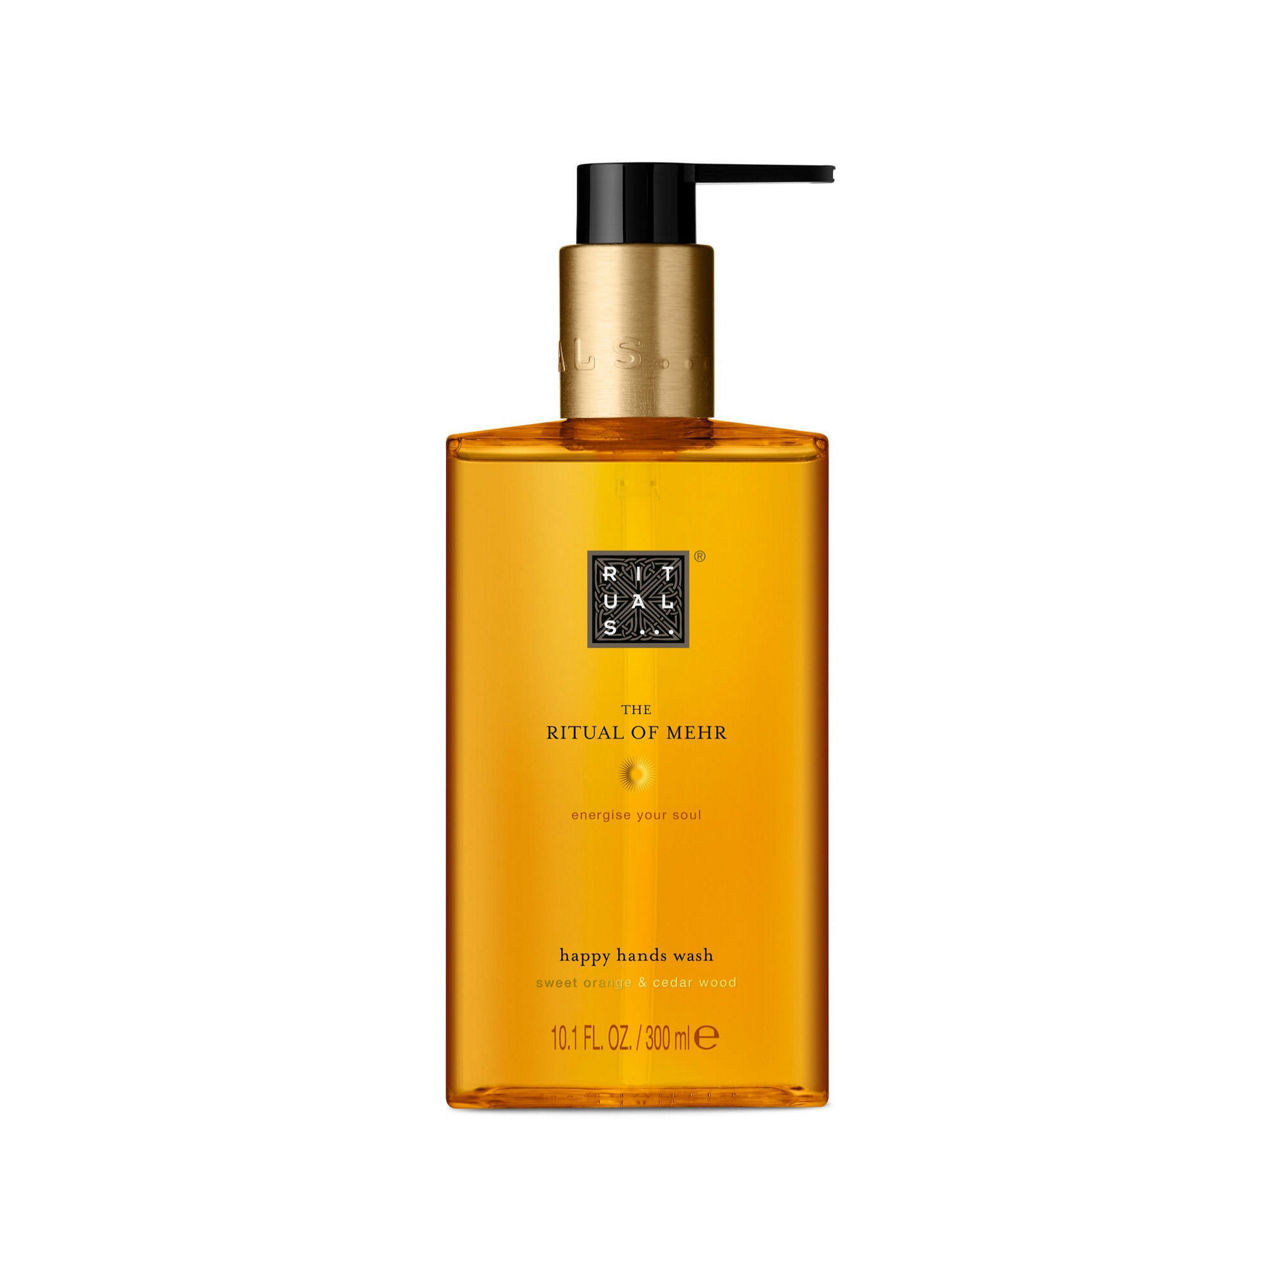 RITUALS Hand Wash Refill from The Ritual of Karma, 600 ml - With